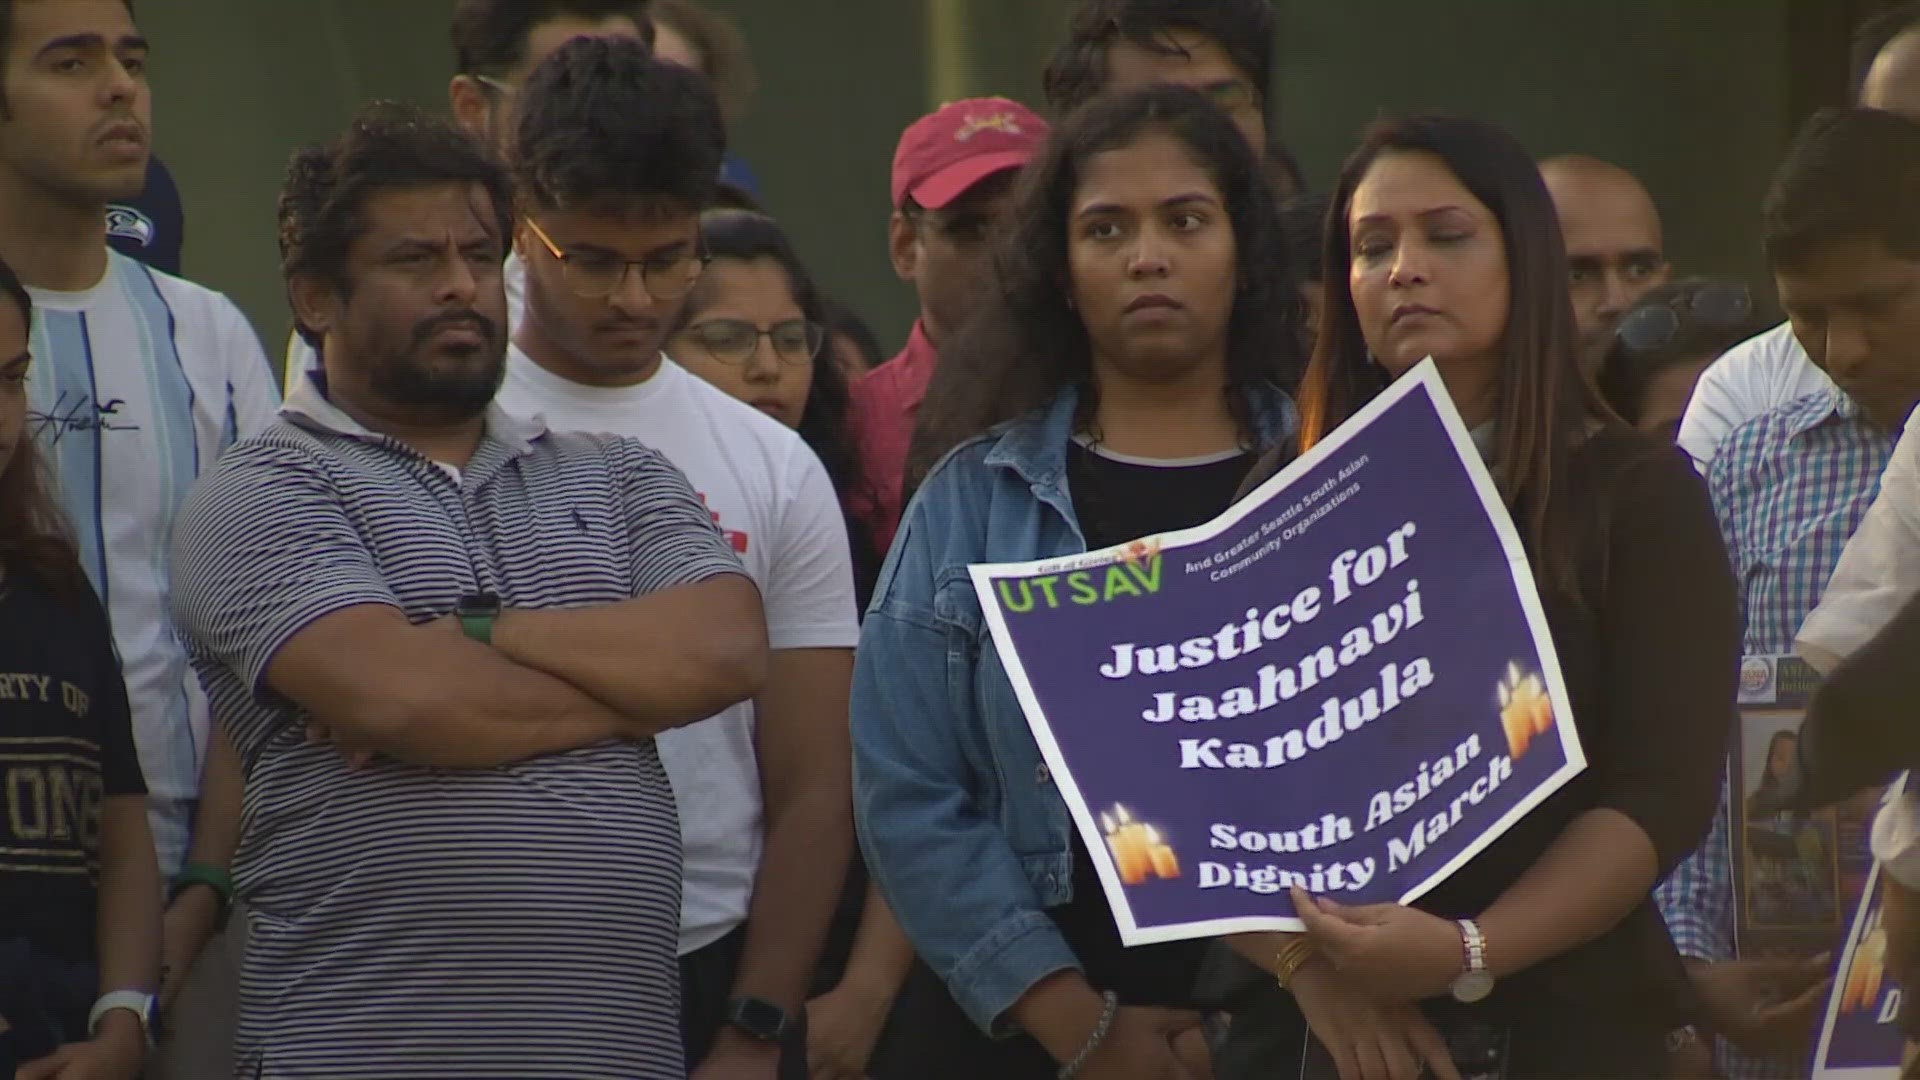 Local leaders met with representatives from the South Asian community in Seattle on Saturday to discuss the death of 23-year-old Jaahnavi Kandula.